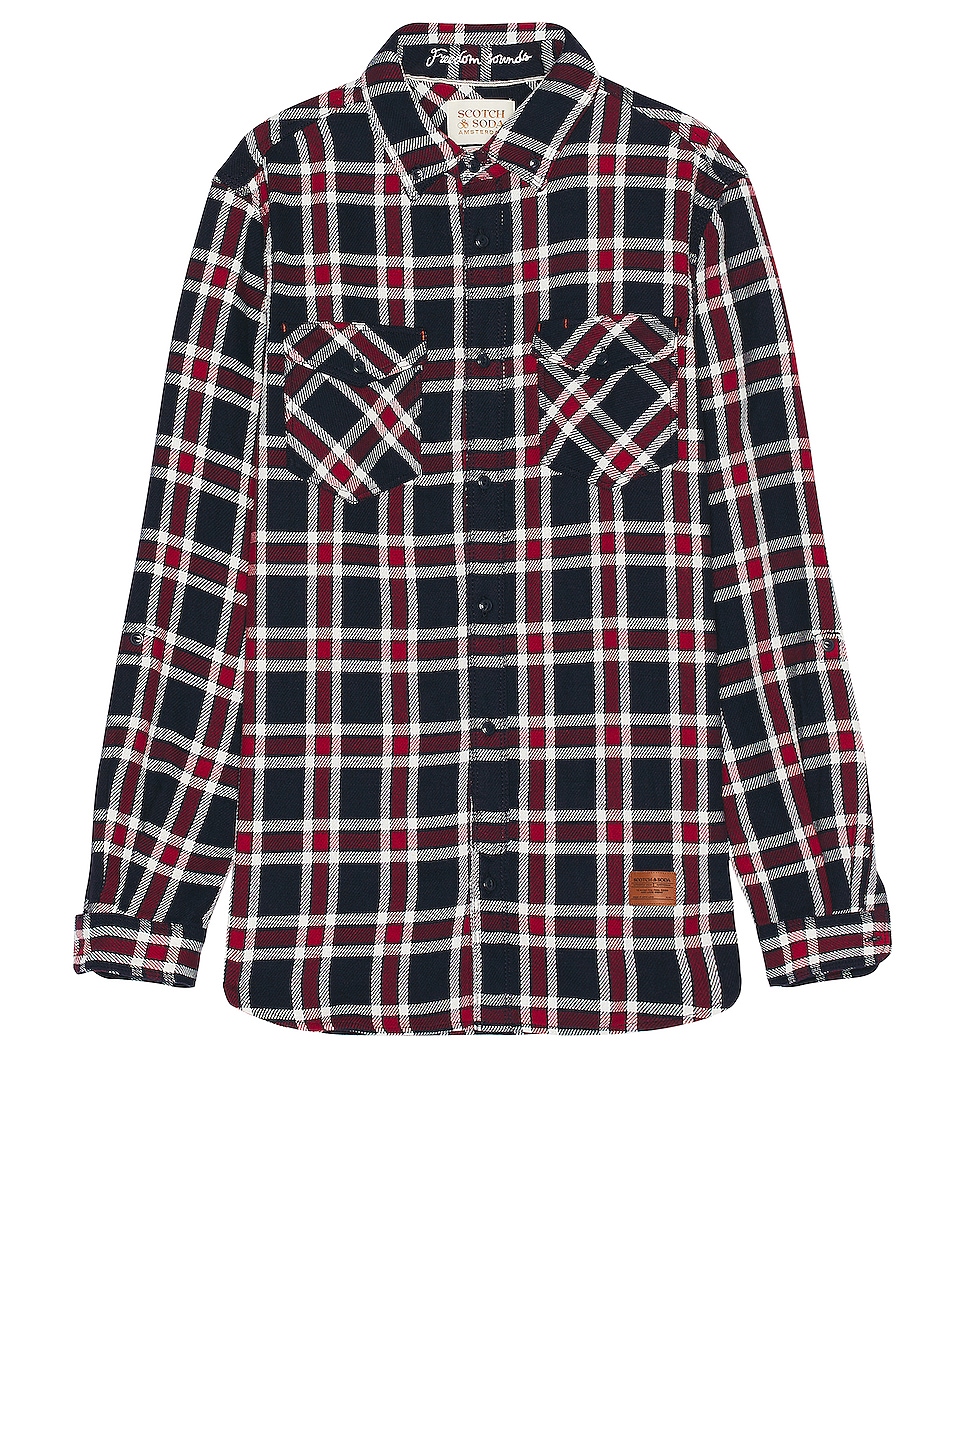 Рубашка Scotch & Soda Archive Double Face Twill Check, цвет Red & Blue карты bicycle double face red blue